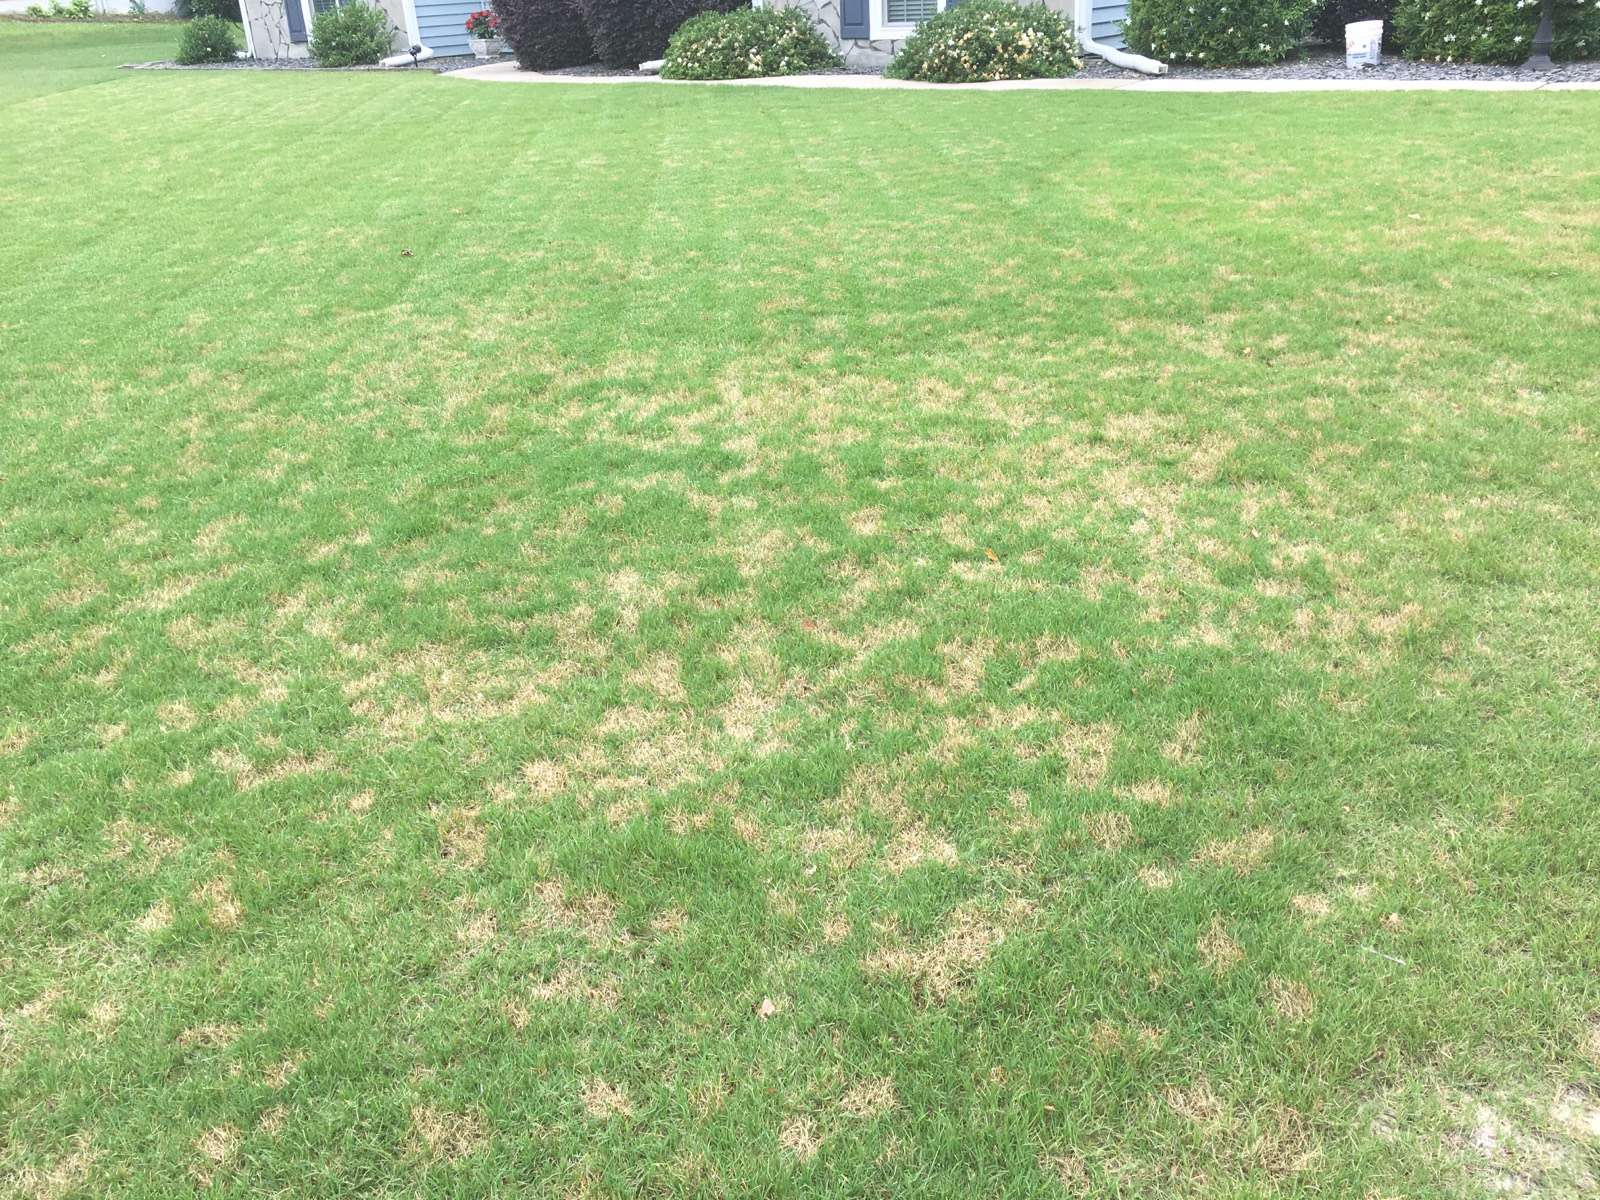 Common Lawn Disease During Summer